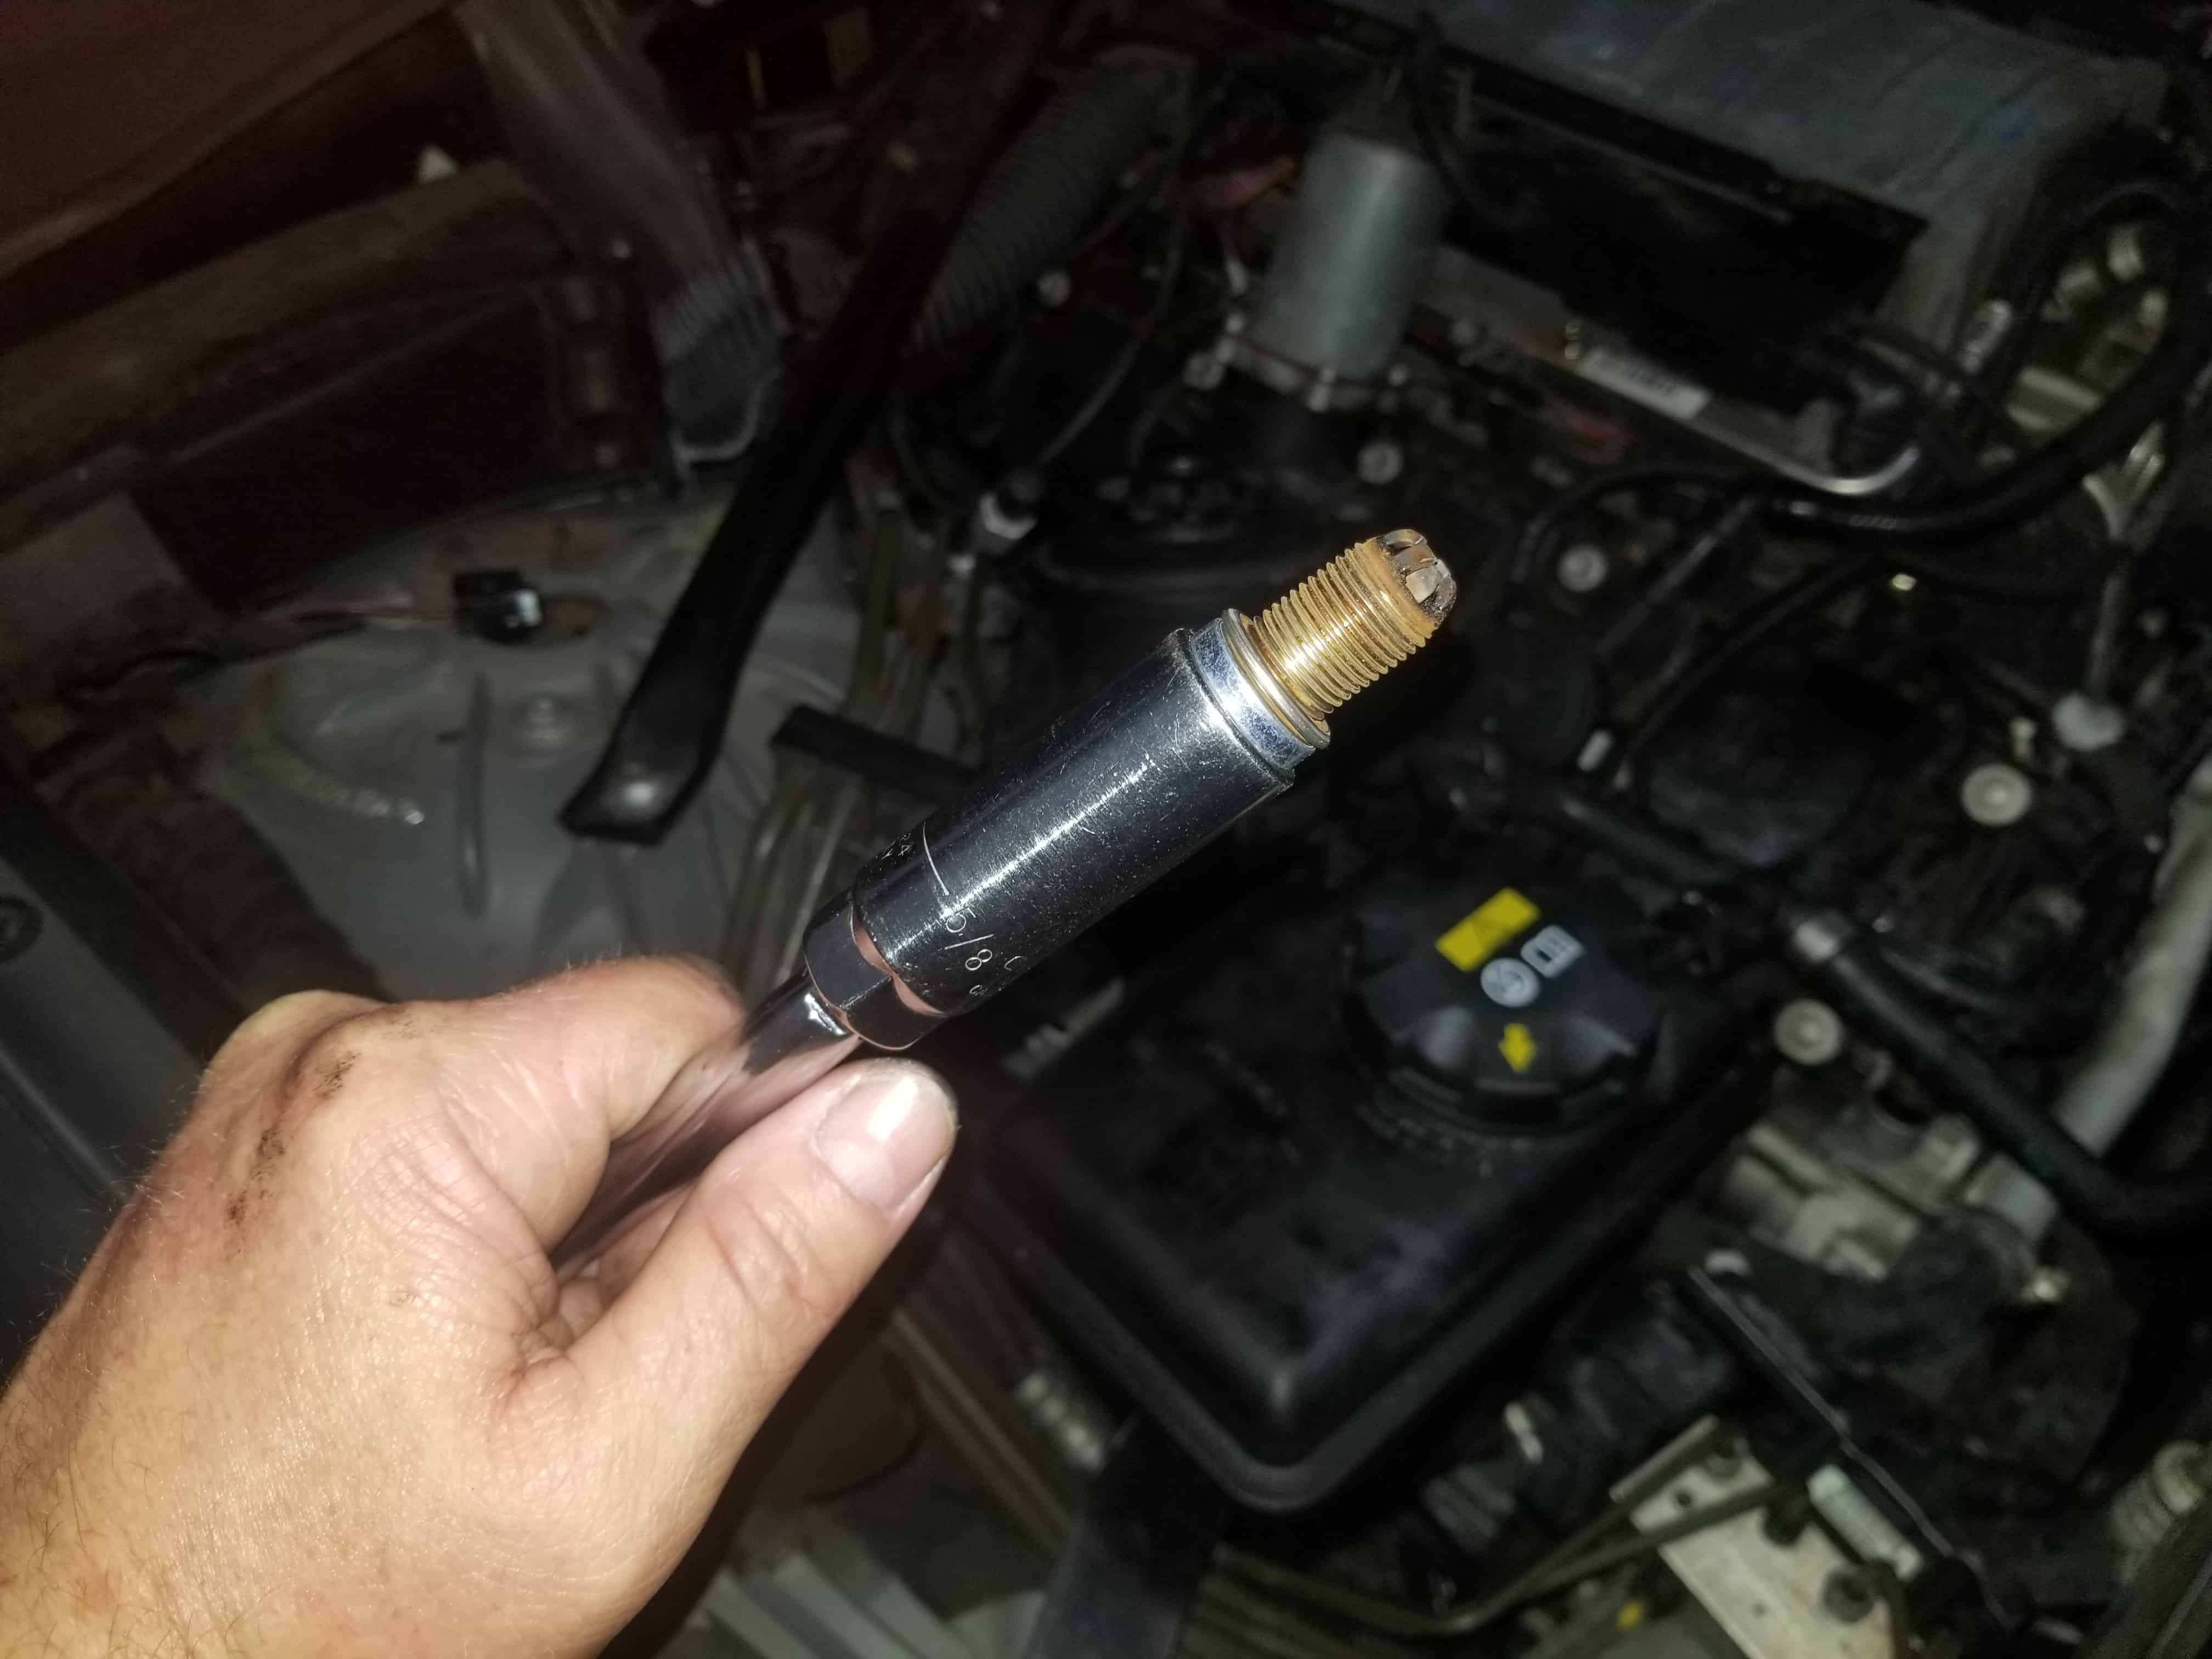 BMW N62 engine tune up - Spark plug removed from cylinder 1